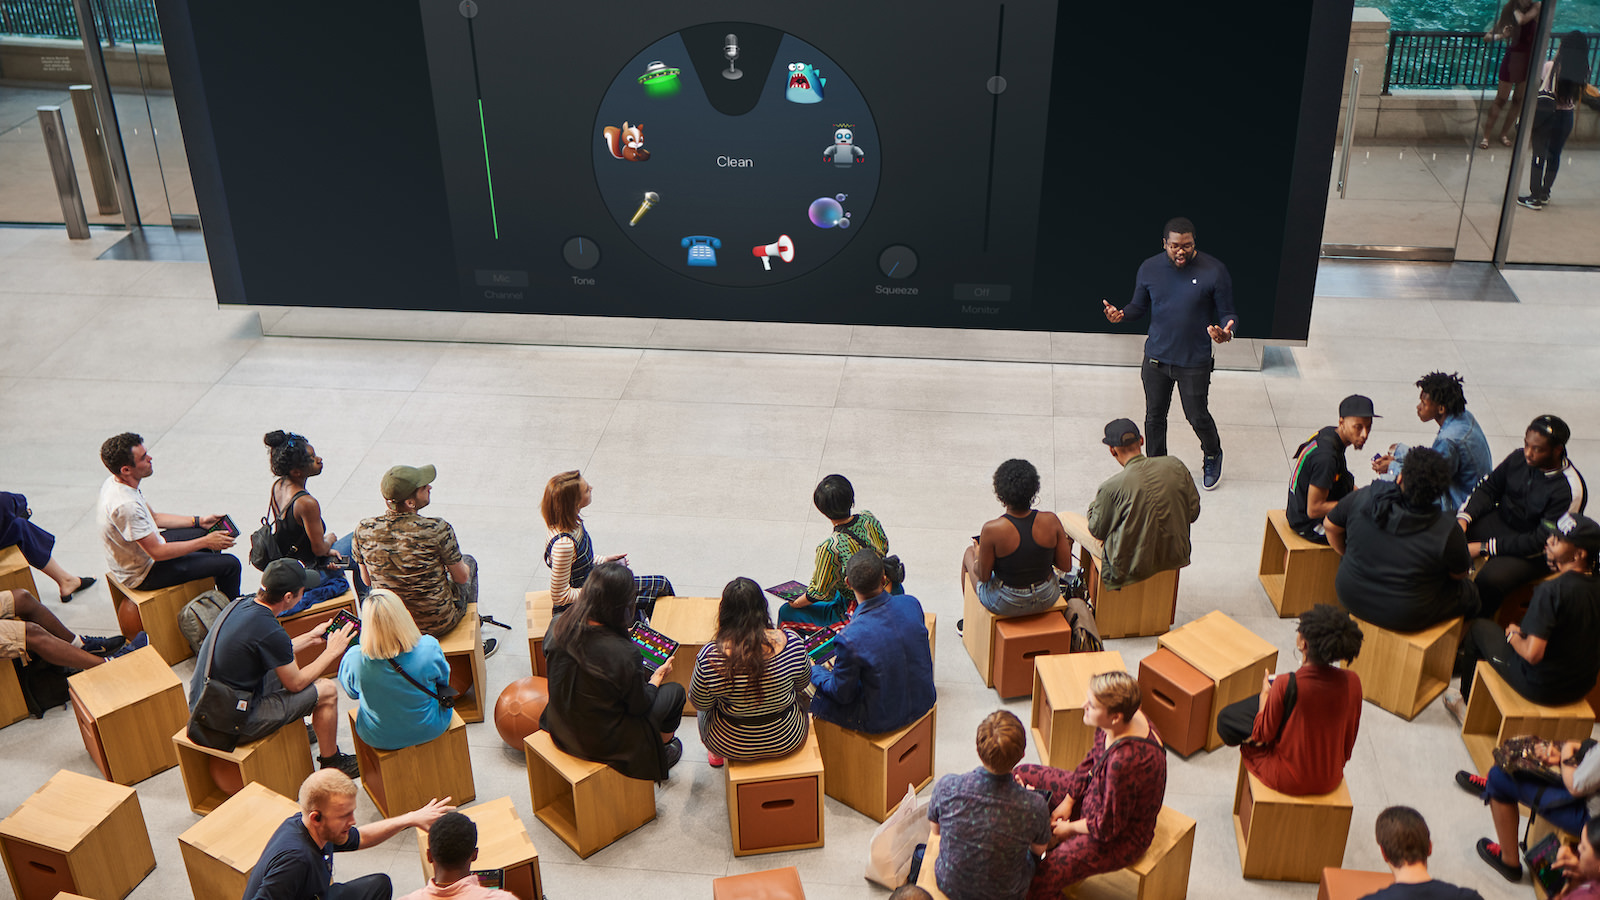 Apple-announces-new-Today-at-Apple-sessions-Music-lab-teachers-telling-stories-Garageband-01292019.jpg